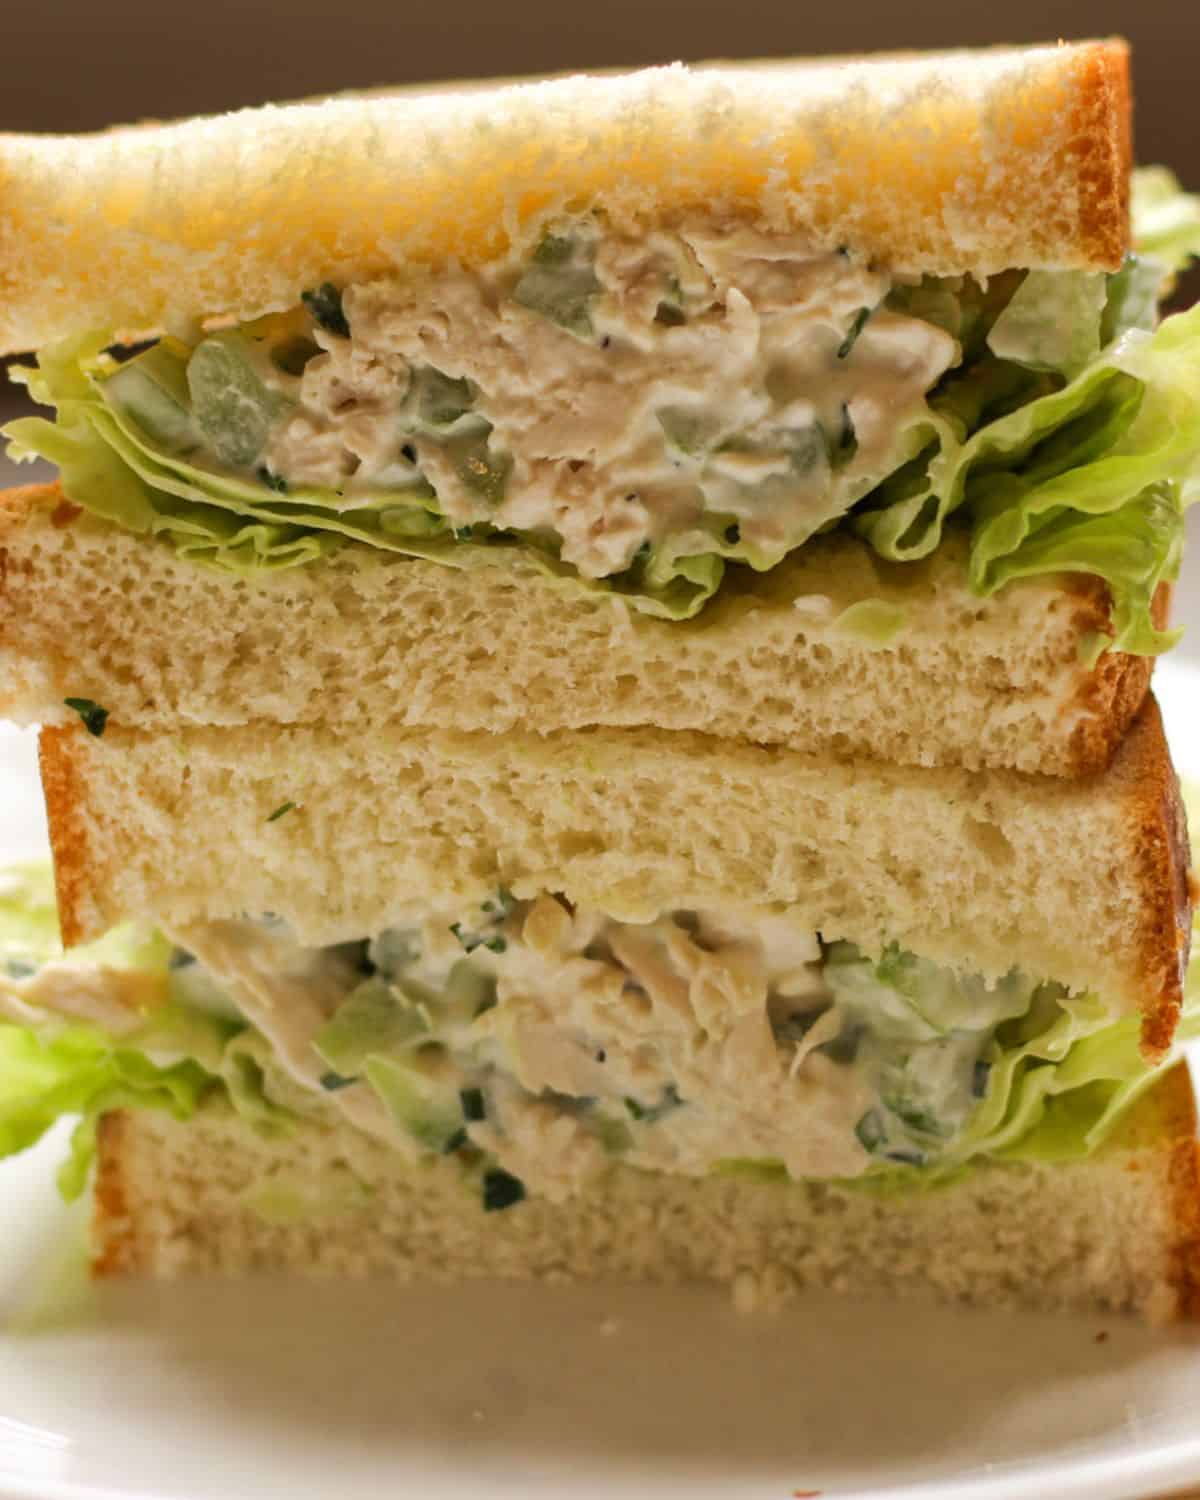 Two chicken sandwich halves stacked on top of each other. The sandwich is made with white bread, green lettuce and creamy chicken salad.